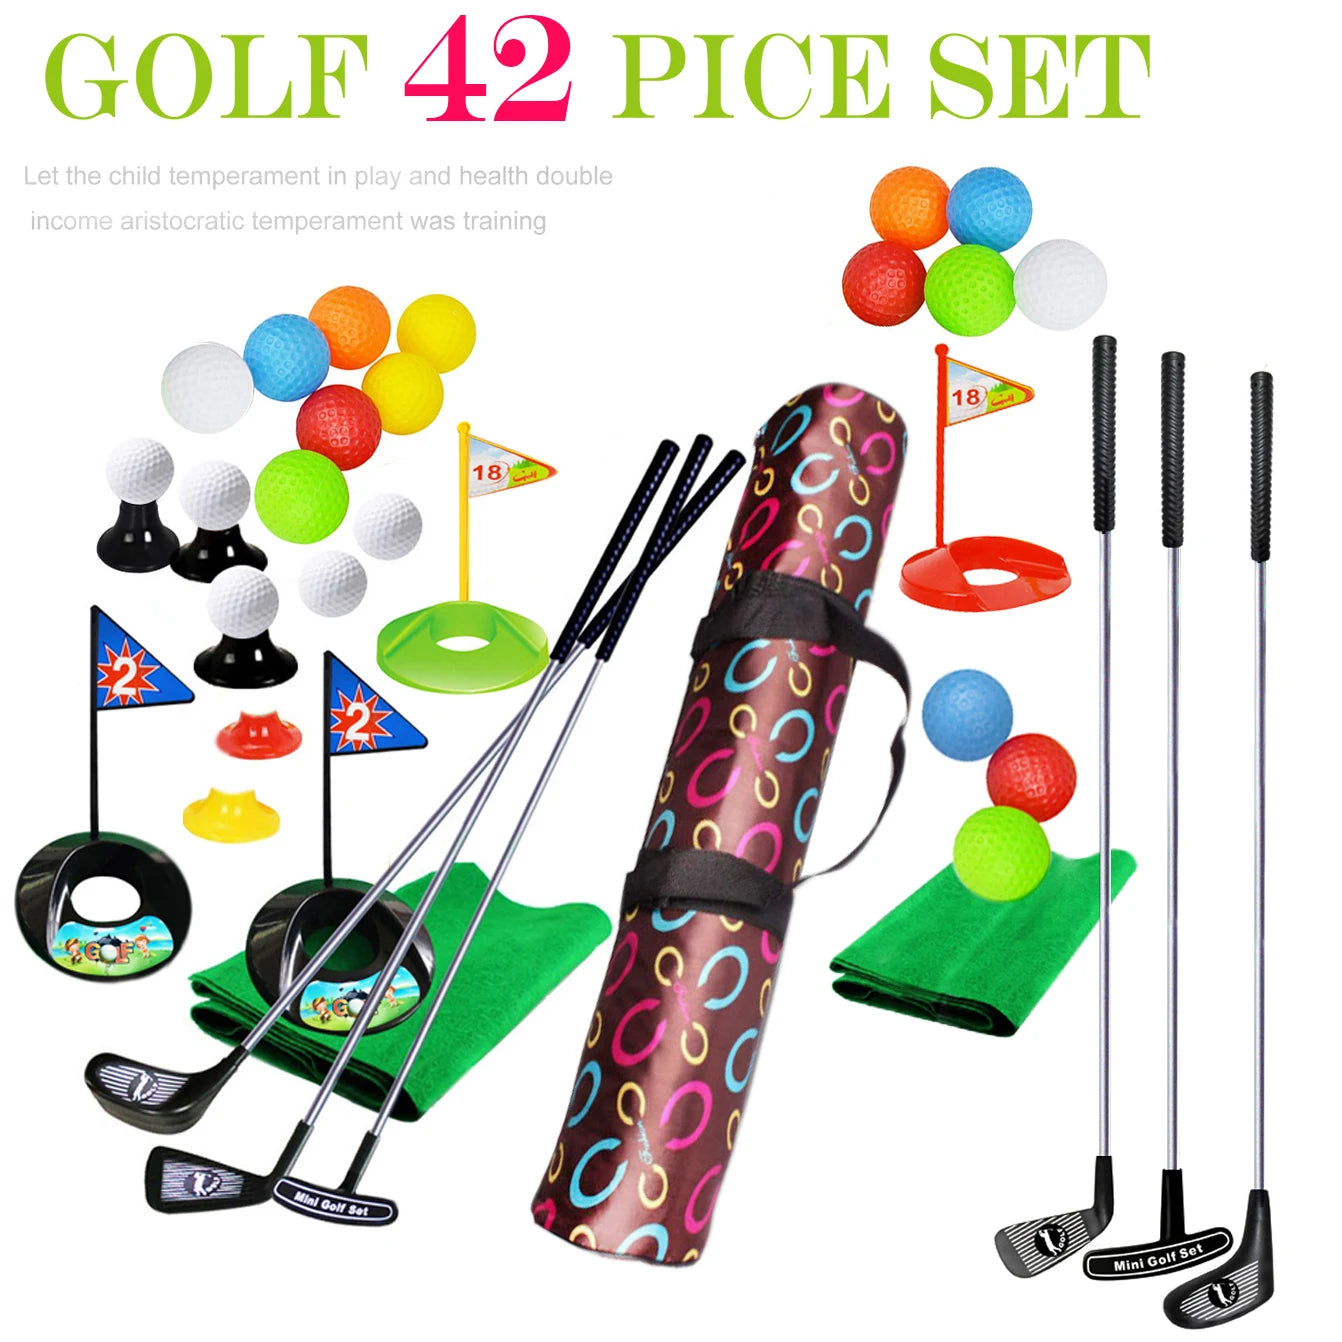 29PCS Upgraded Golf Toy Set for Kids with Flag and Accessories